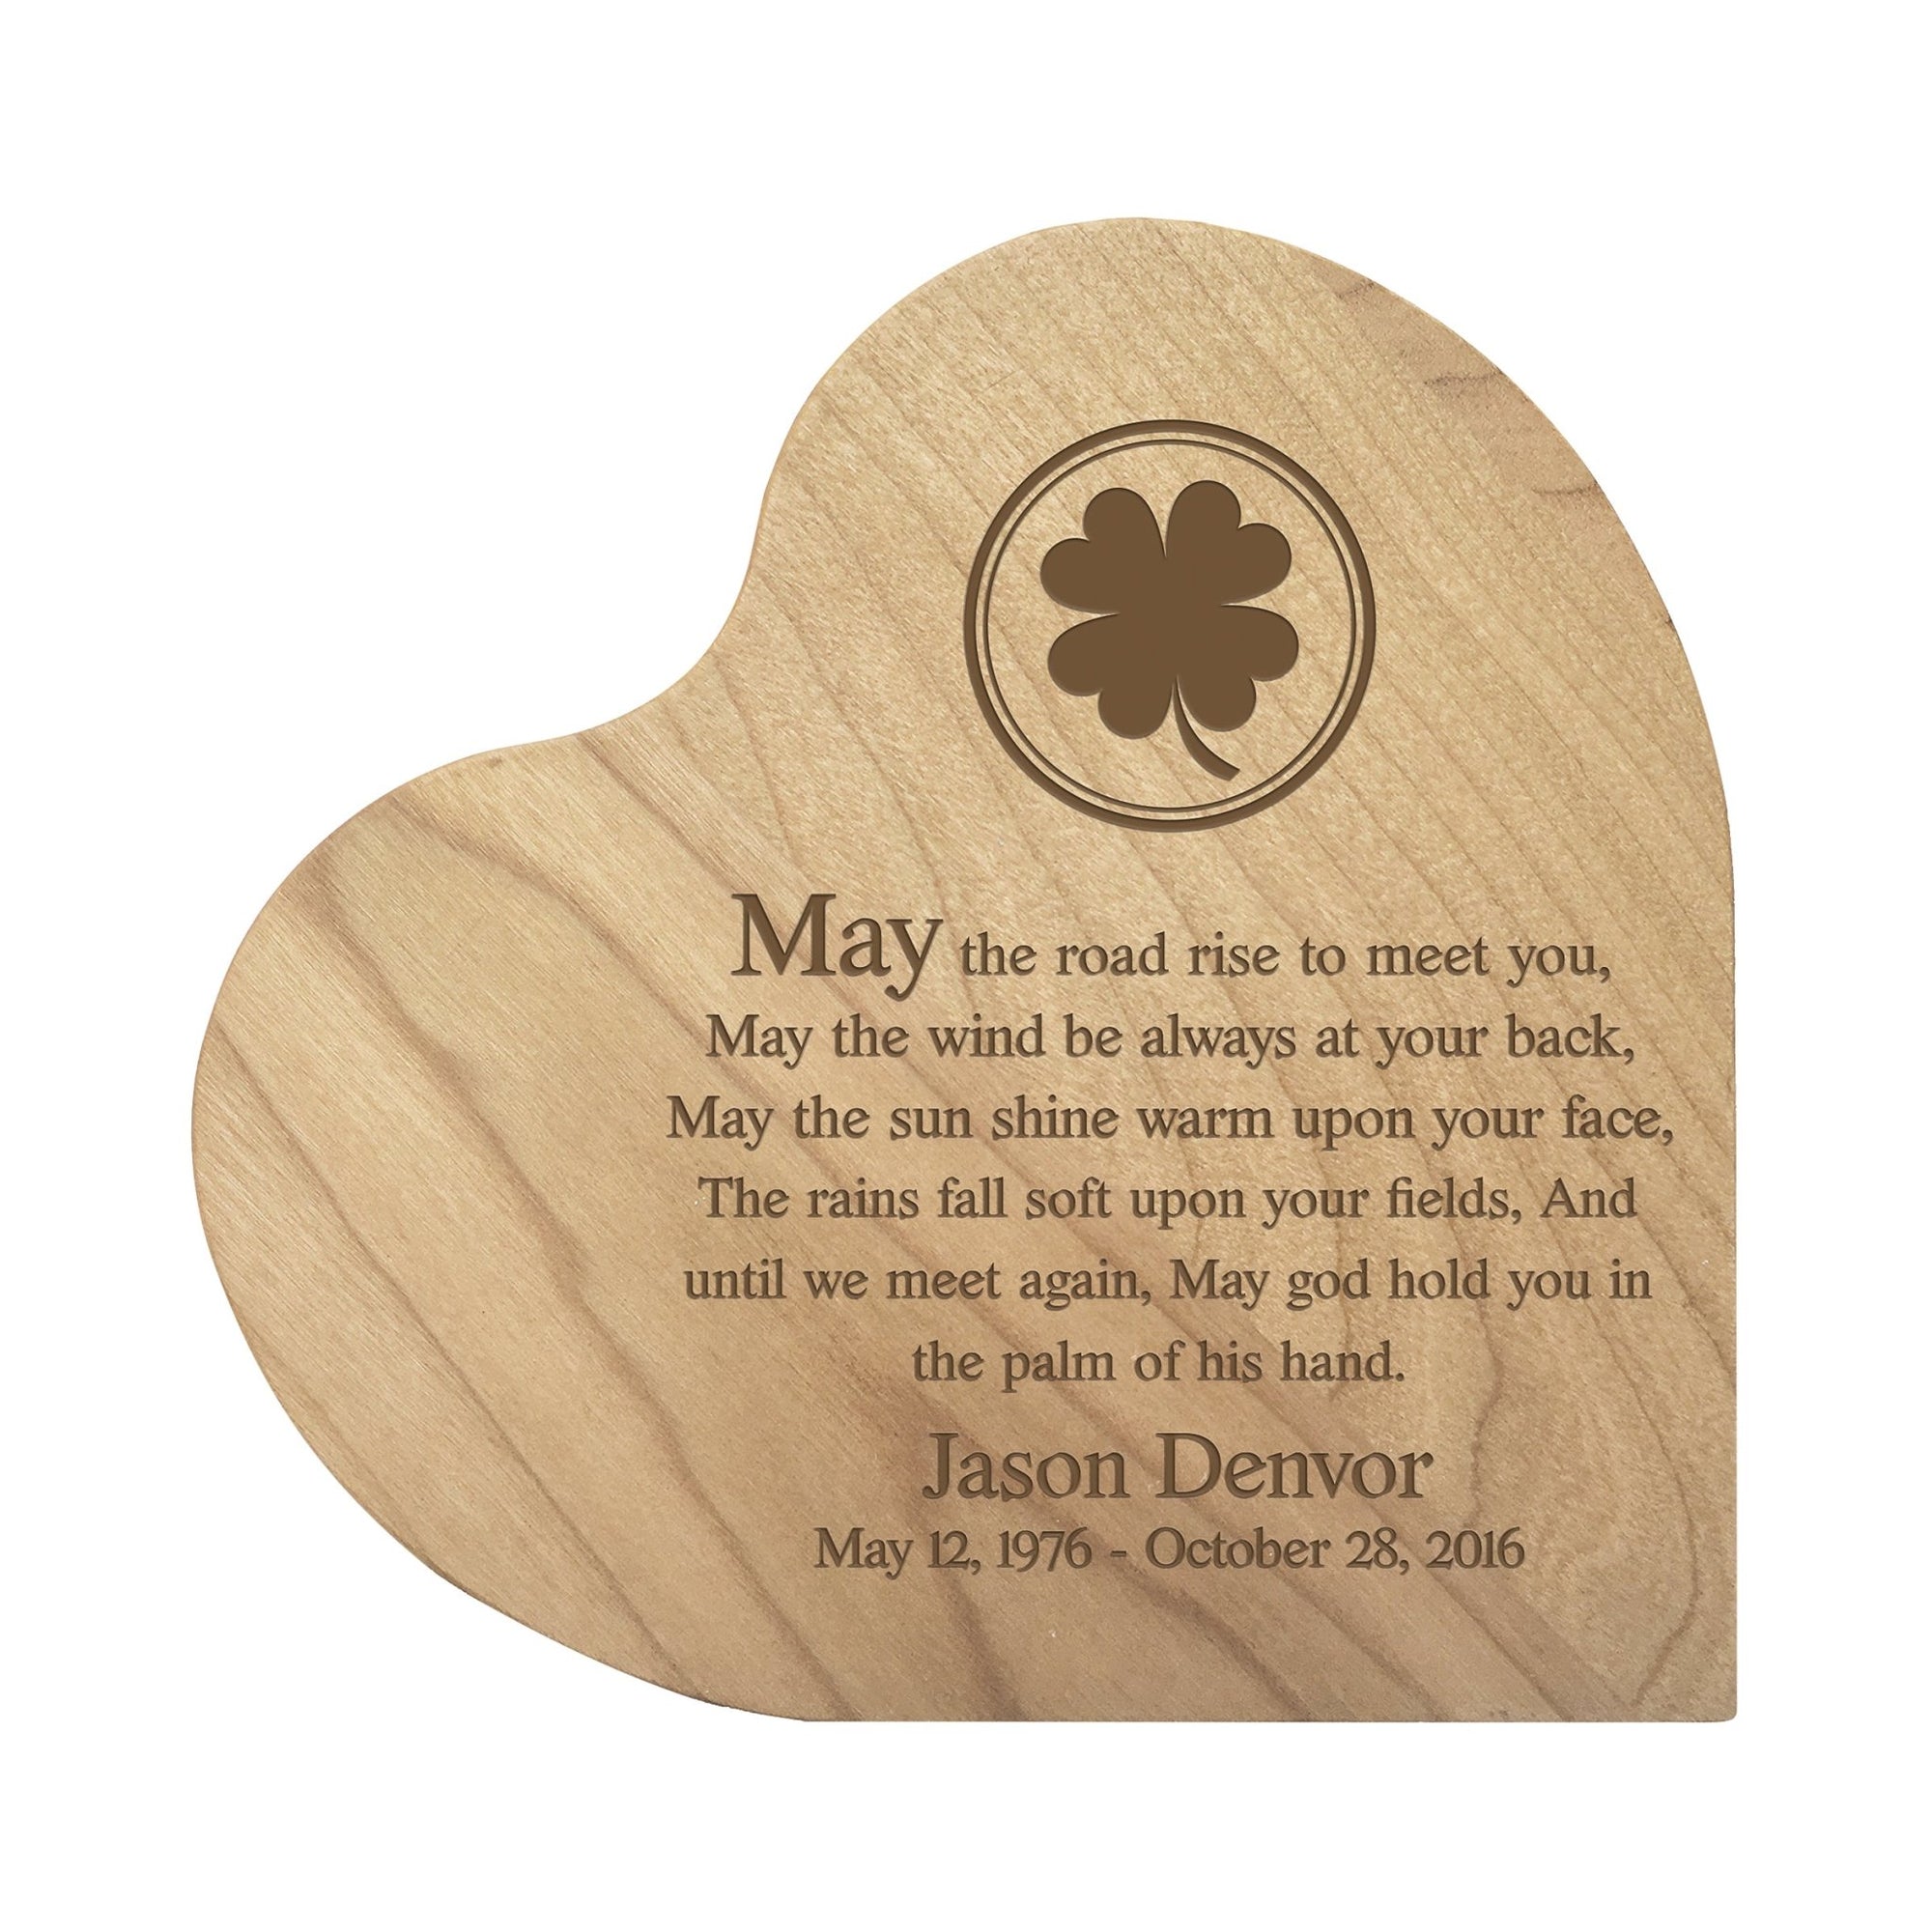 Engraved Wooden Heart Block 5” x 5.25” x 0.75” - May The Road Rise To Meet You - LifeSong Milestones